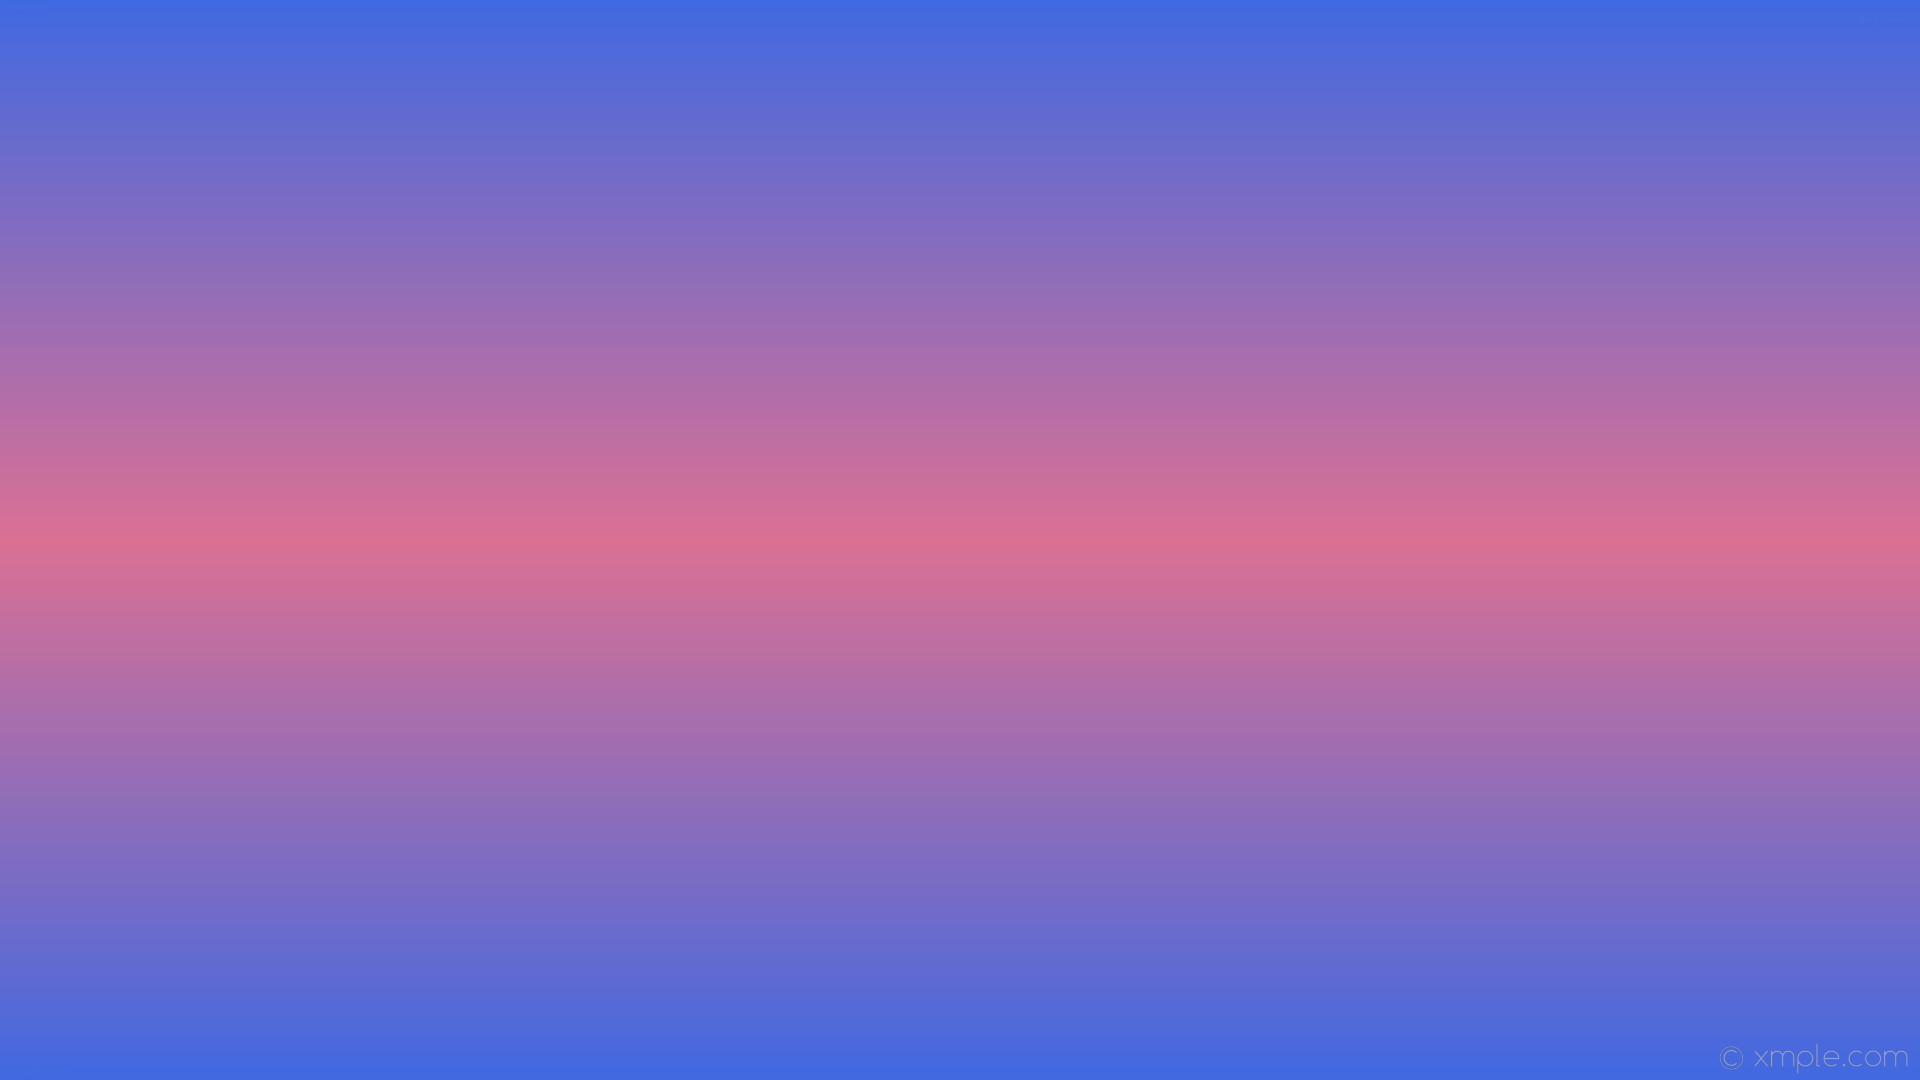 1920x1080 wallpaper linear blue pink highlight gradient royal blue pale violet red  #4169e1 #db7093 90